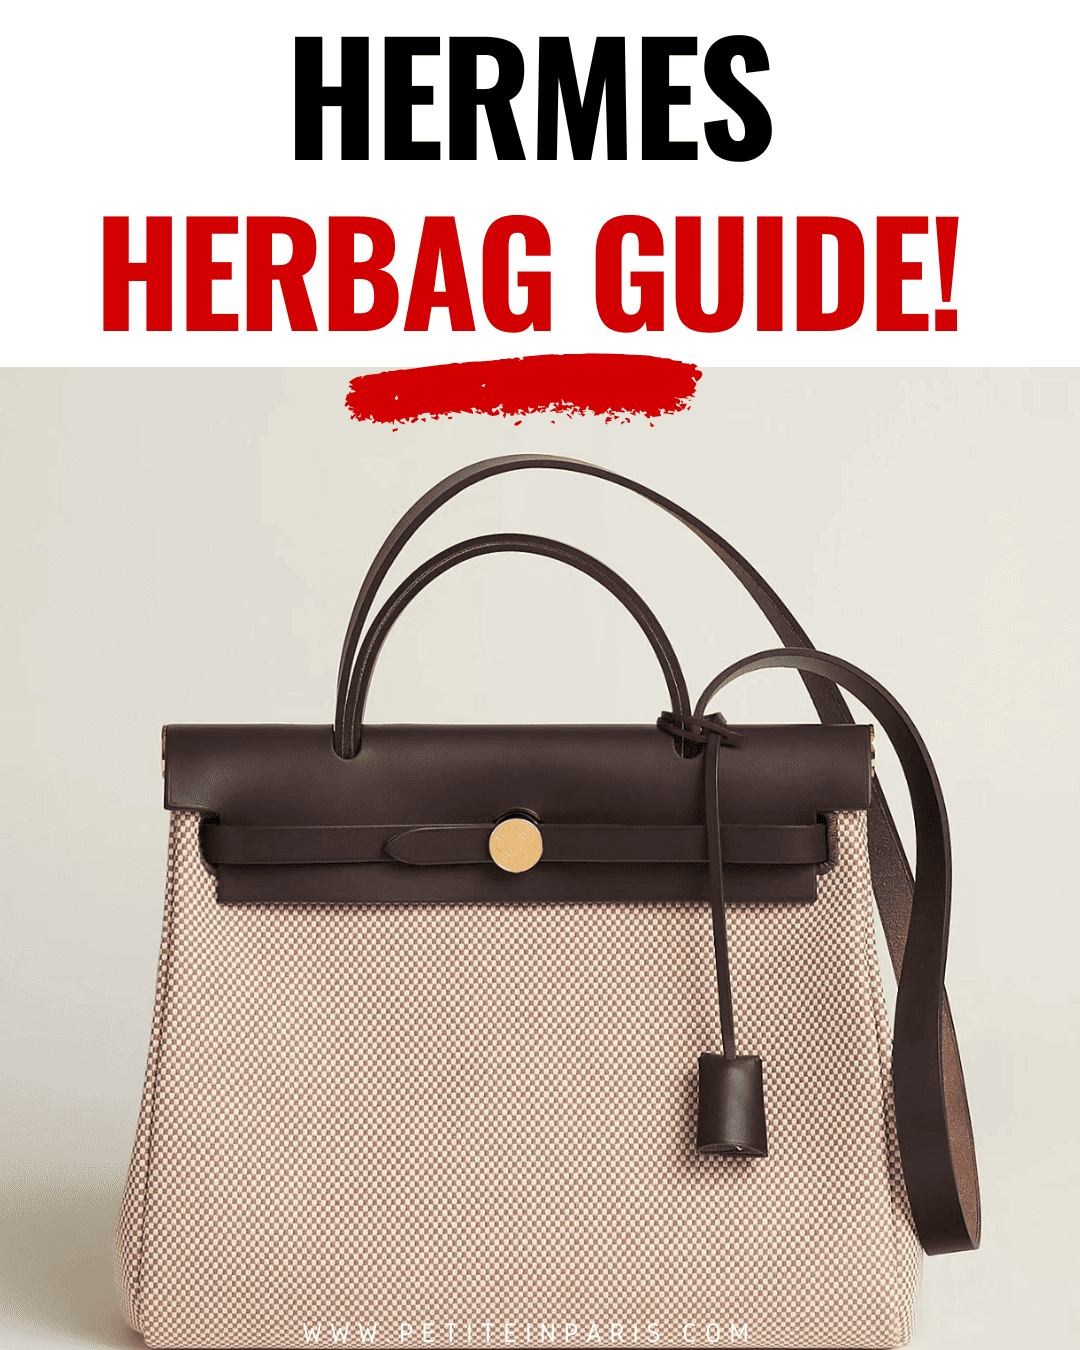 Facts about the Hermes Herbag